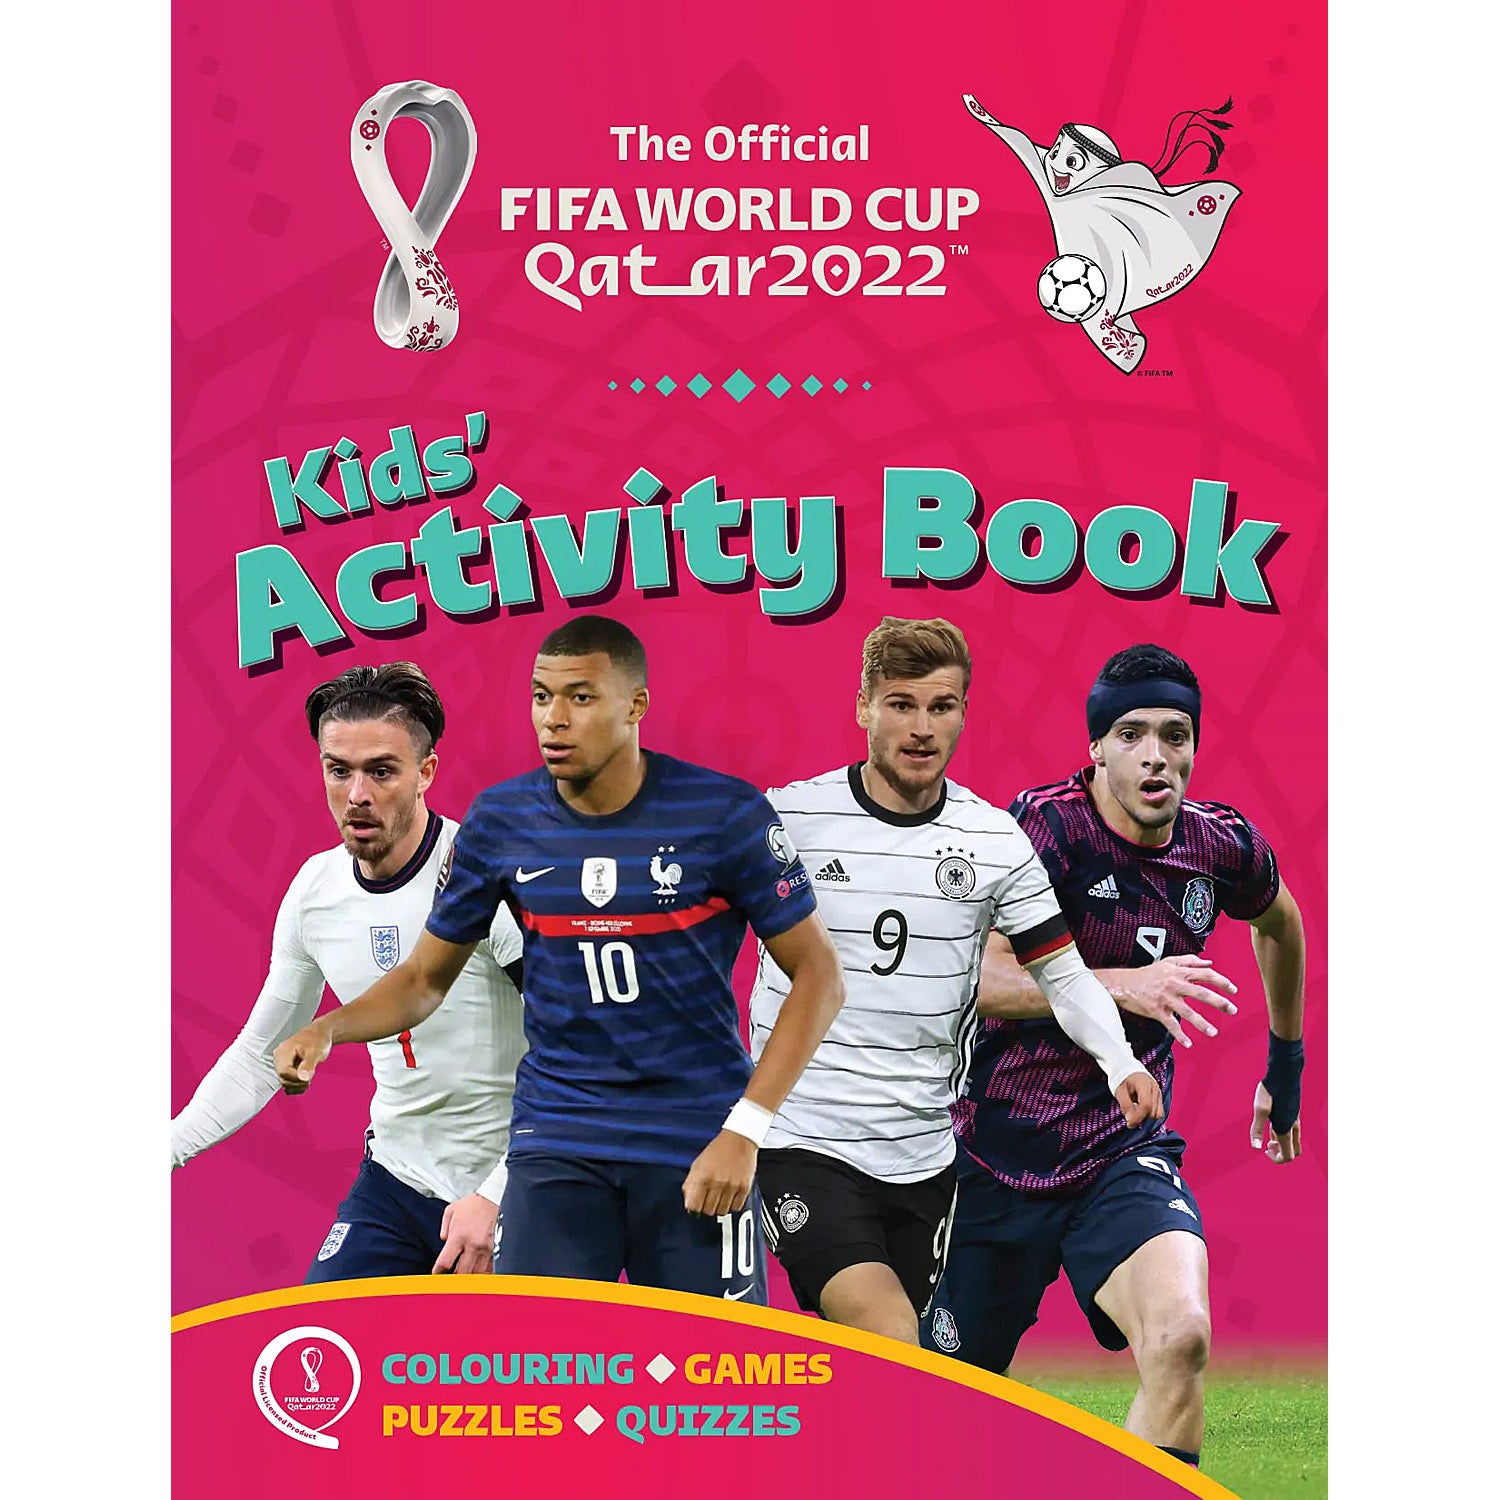 The Official FIFA World Cup Qatar 2022 Kids' Activity Book | Soccer ...